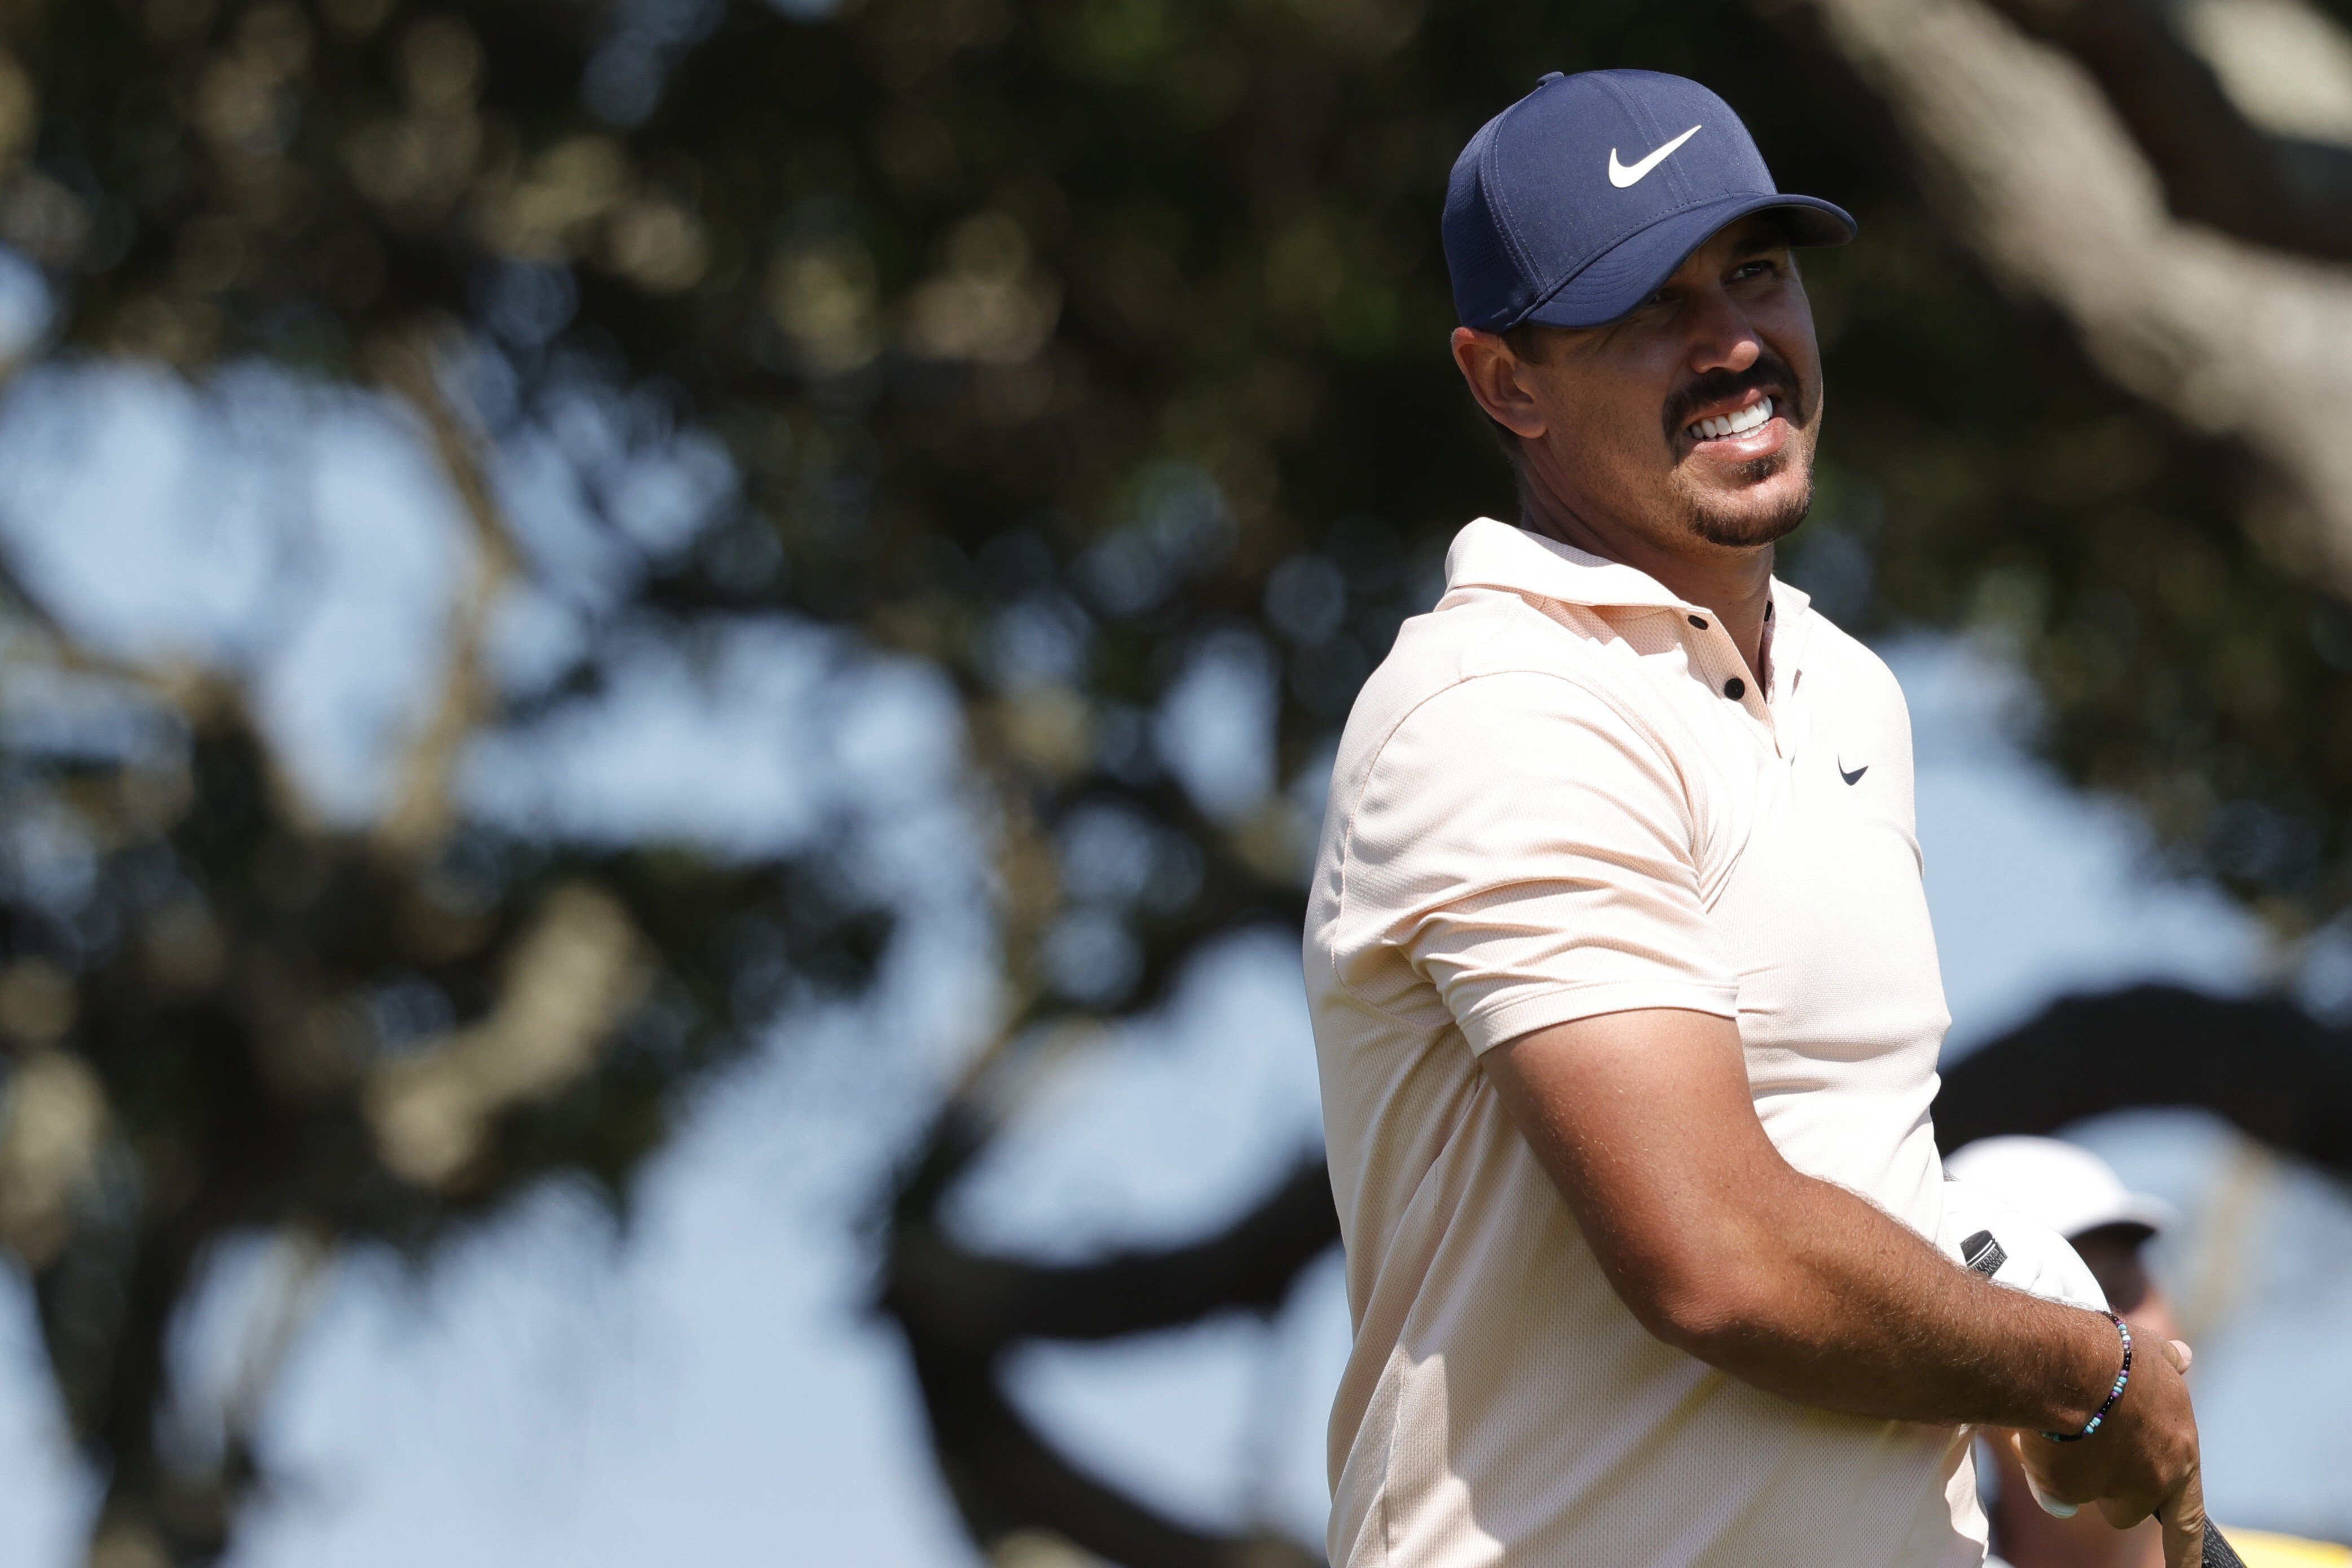 Brooks Koepka reacts to his tee shot on the seventh hole of the final round of the 2021 PGA Championship. Photo: Geoff Burke-USA Today Sports